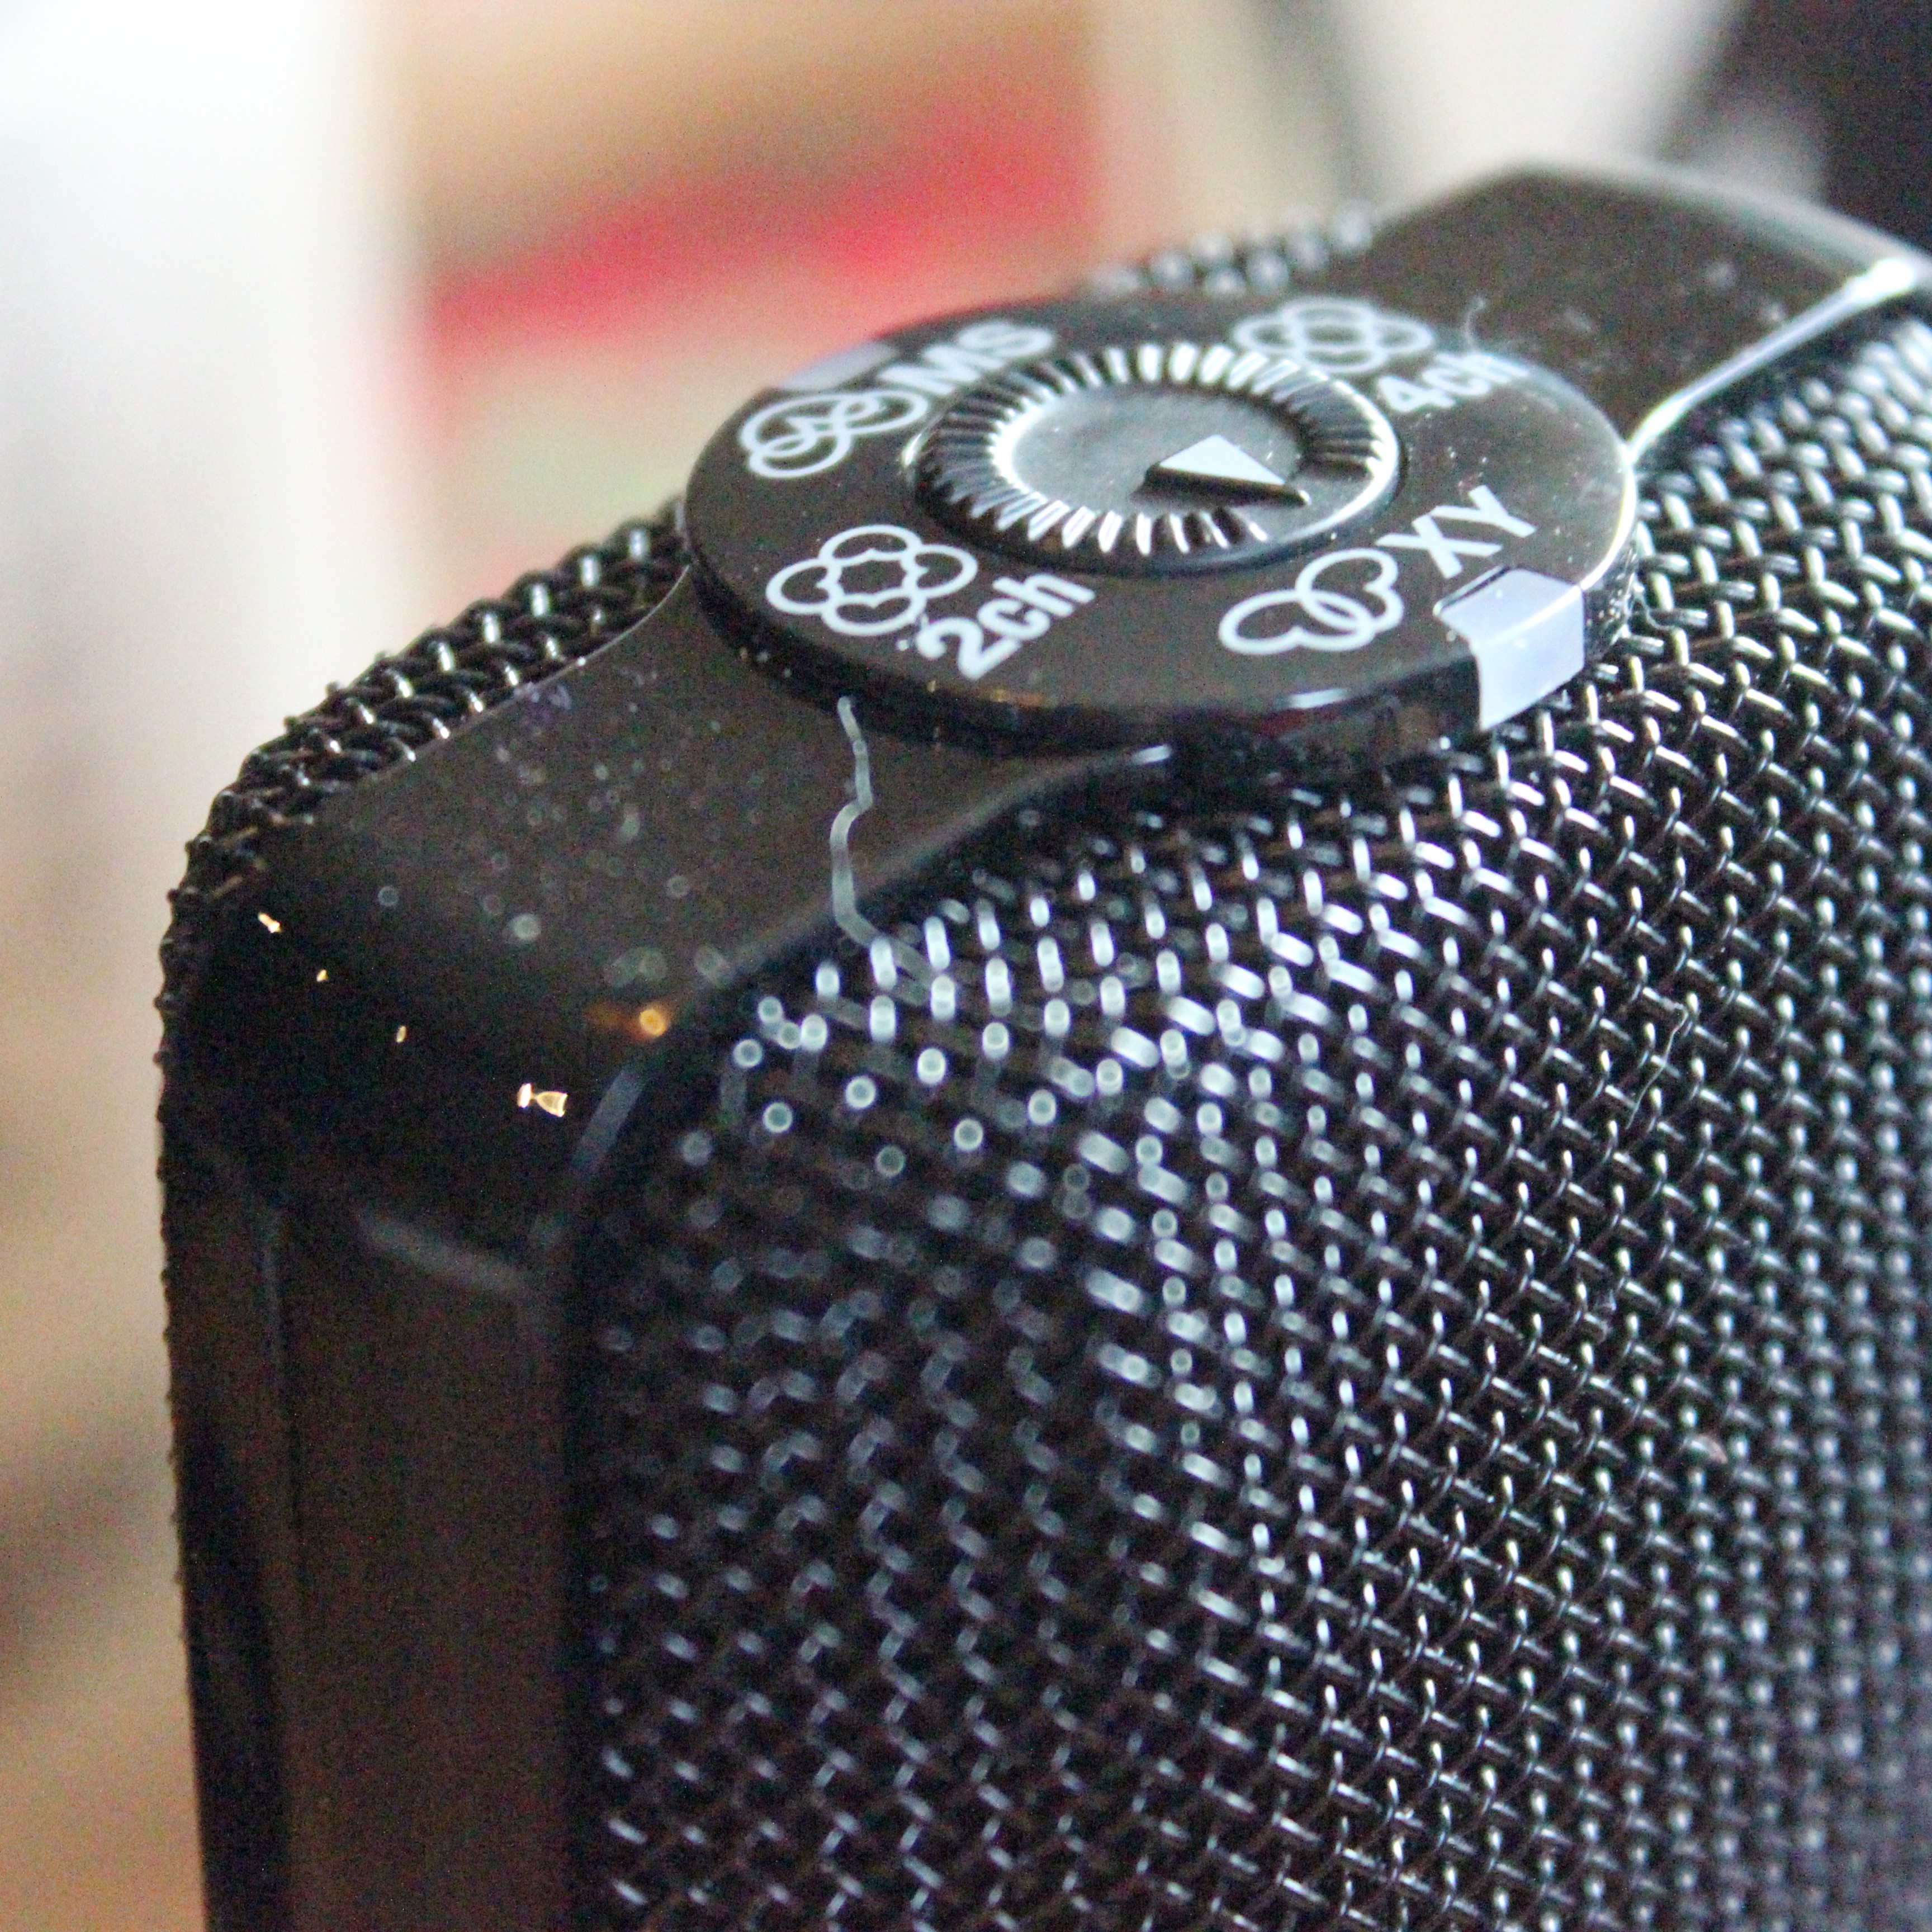 Close-up image of a microphone.